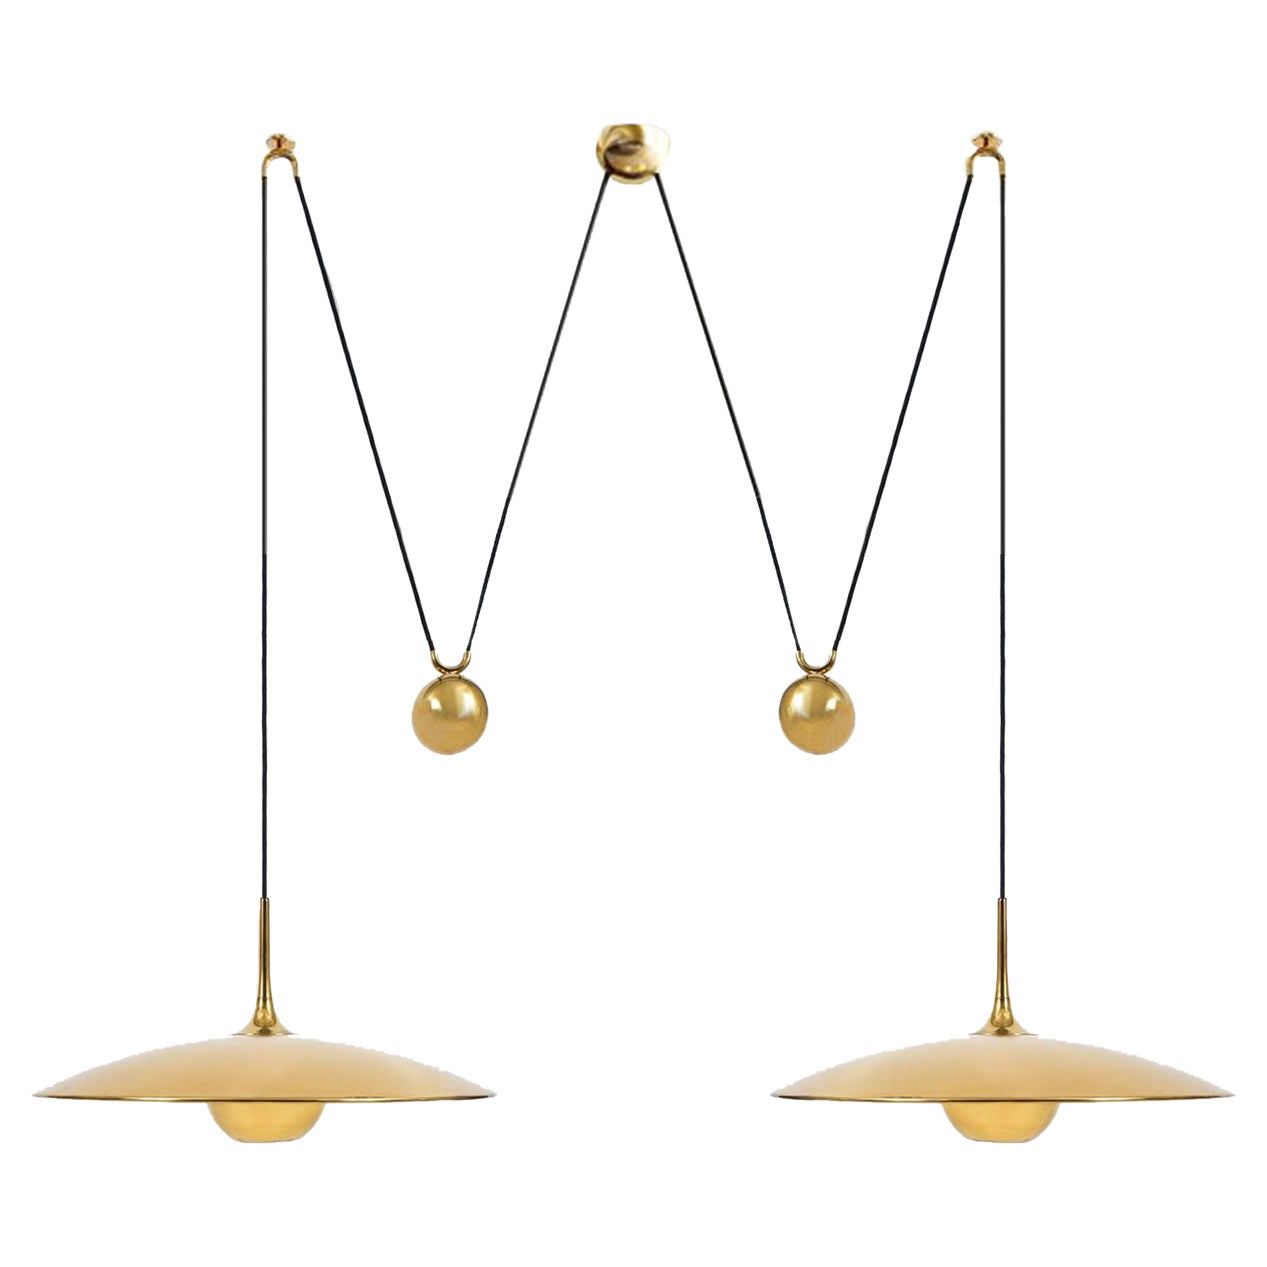 Double Onos 55-Pendant Lamp with Side Counter Weights by Florian Schulz